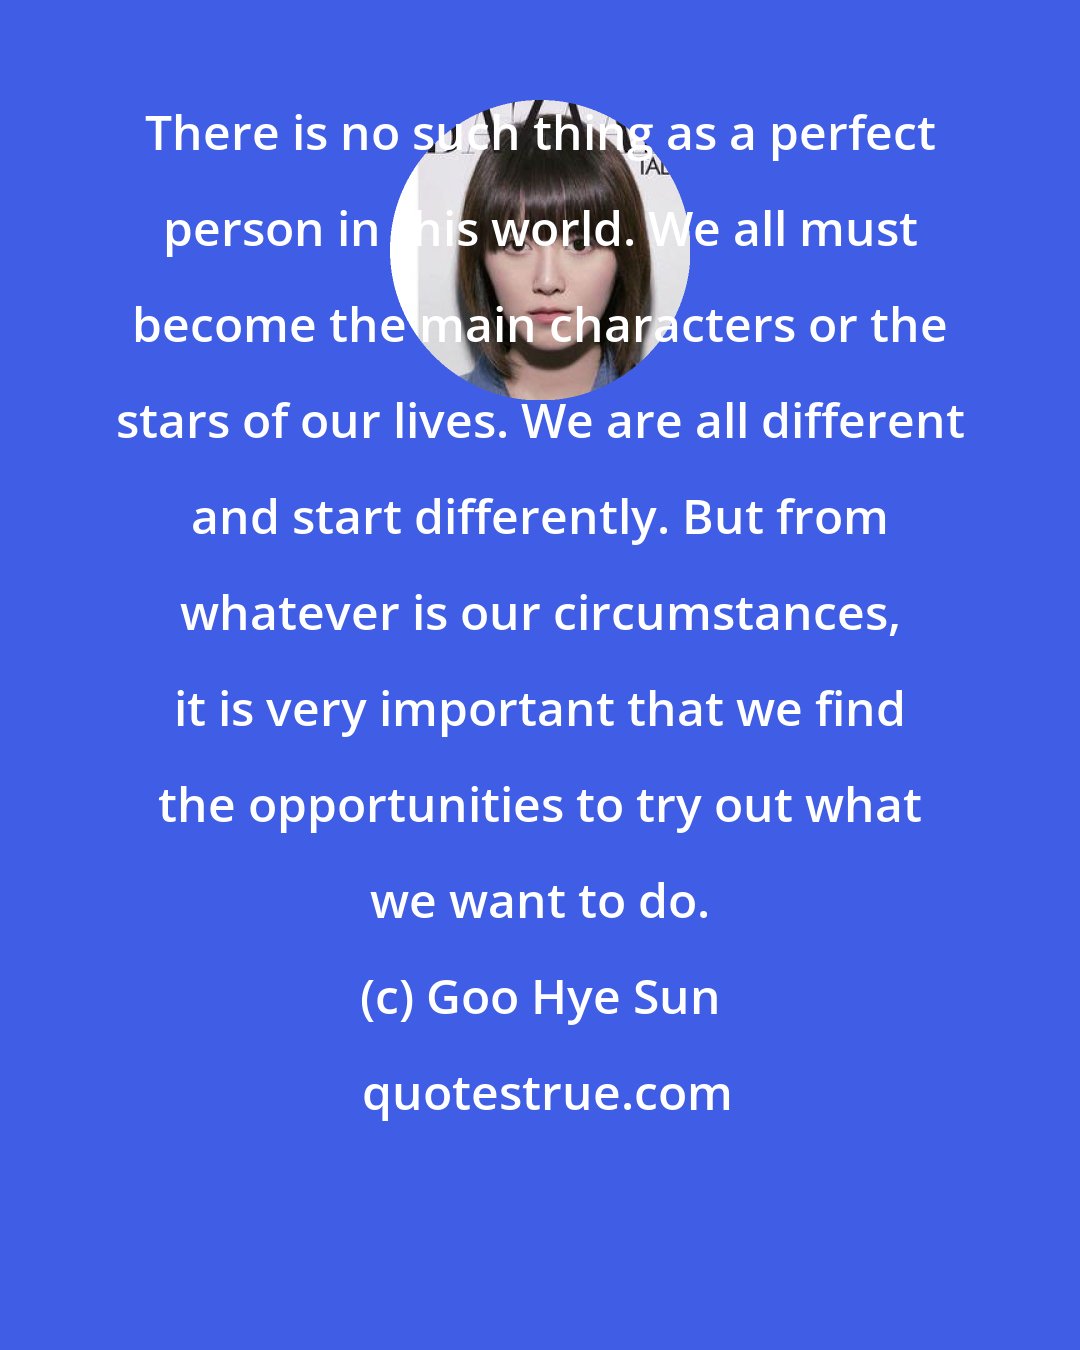 Goo Hye Sun: There is no such thing as a perfect person in this world. We all must become the main characters or the stars of our lives. We are all different and start differently. But from whatever is our circumstances, it is very important that we find the opportunities to try out what we want to do.